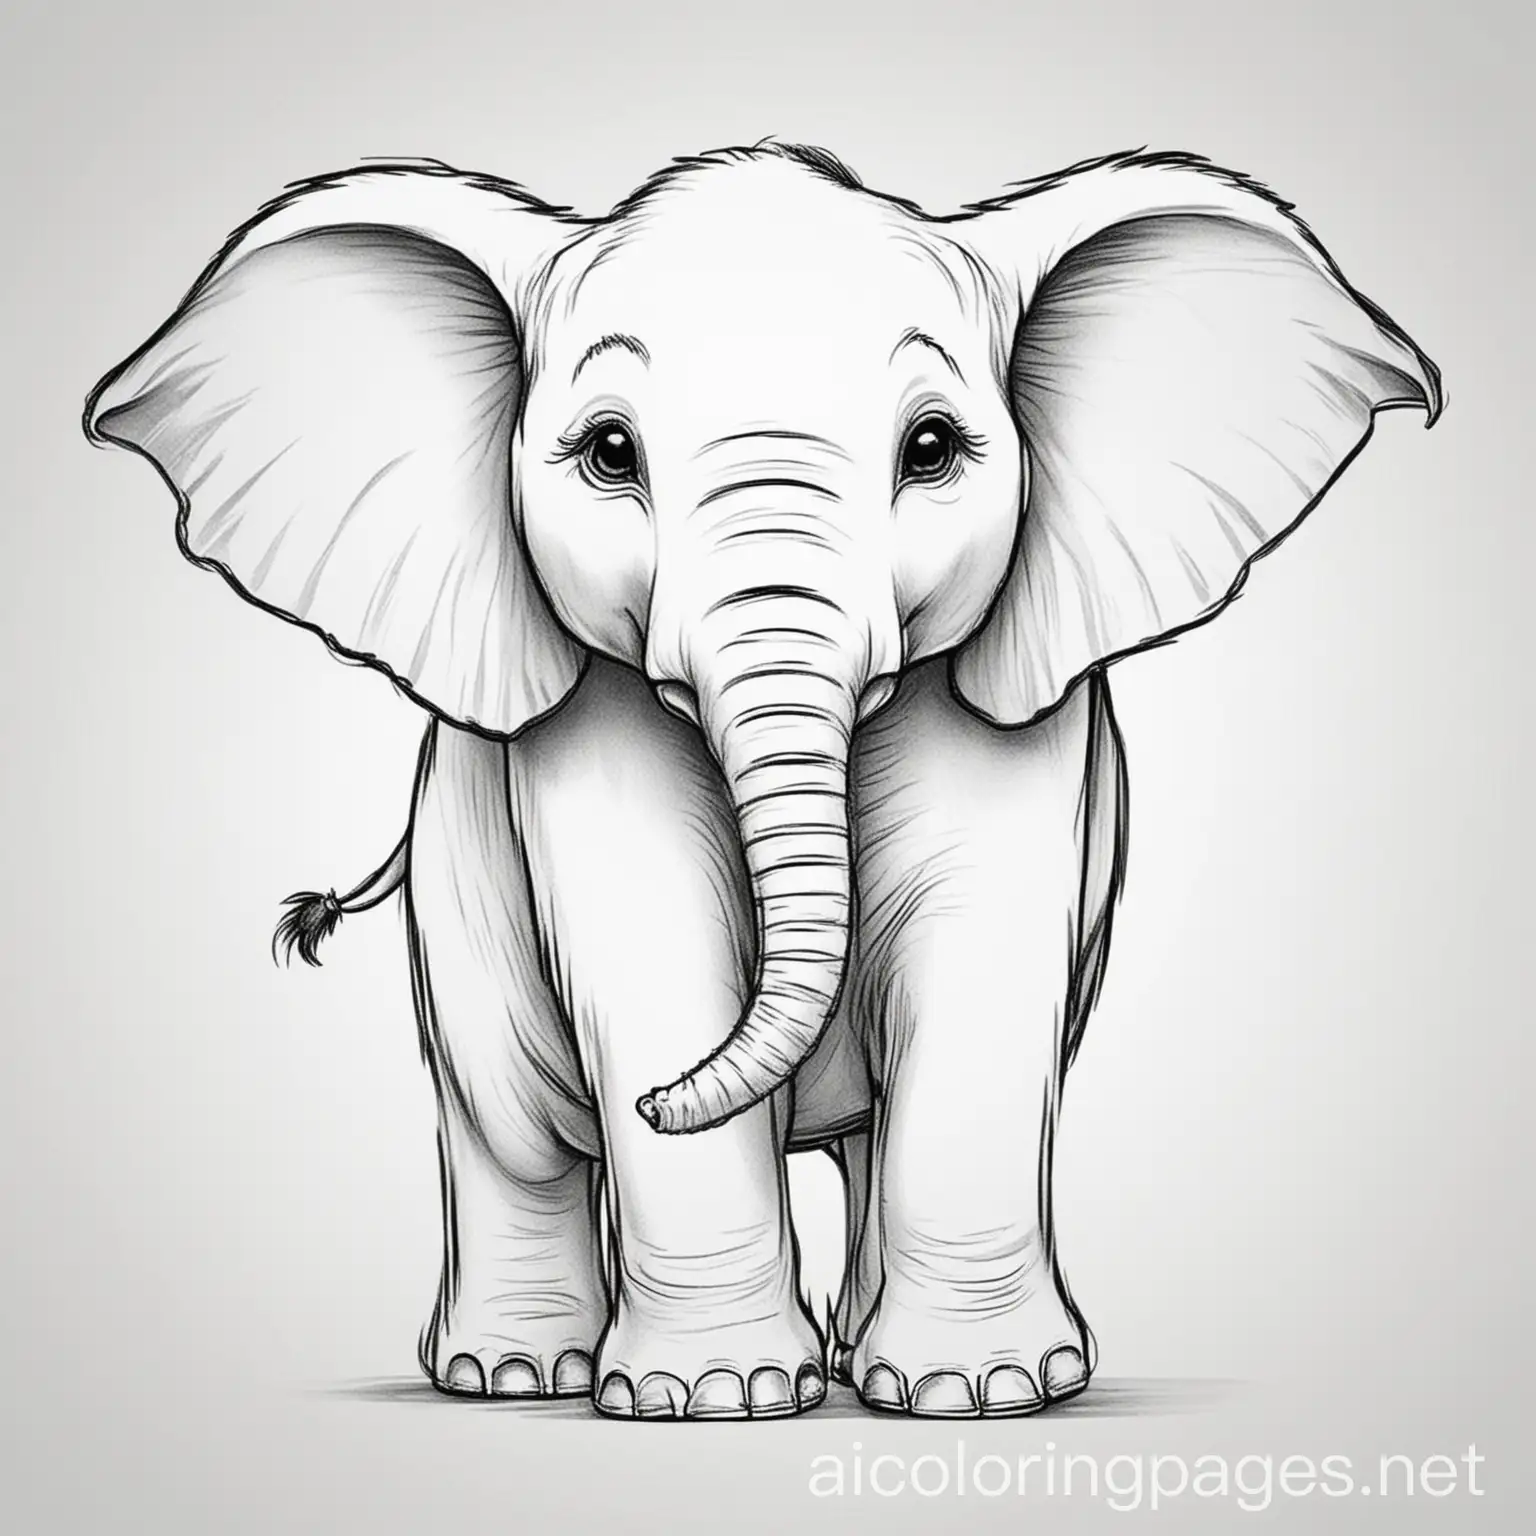 elephant with trunk up in safari coloring page
, Coloring Page, black and white, line art, white background, Simplicity, Ample White Space. The background of the coloring page is plain white to make it easy for young children to color within the lines. The outlines of all the subjects are easy to distinguish, making it simple for kids to color without too much difficulty